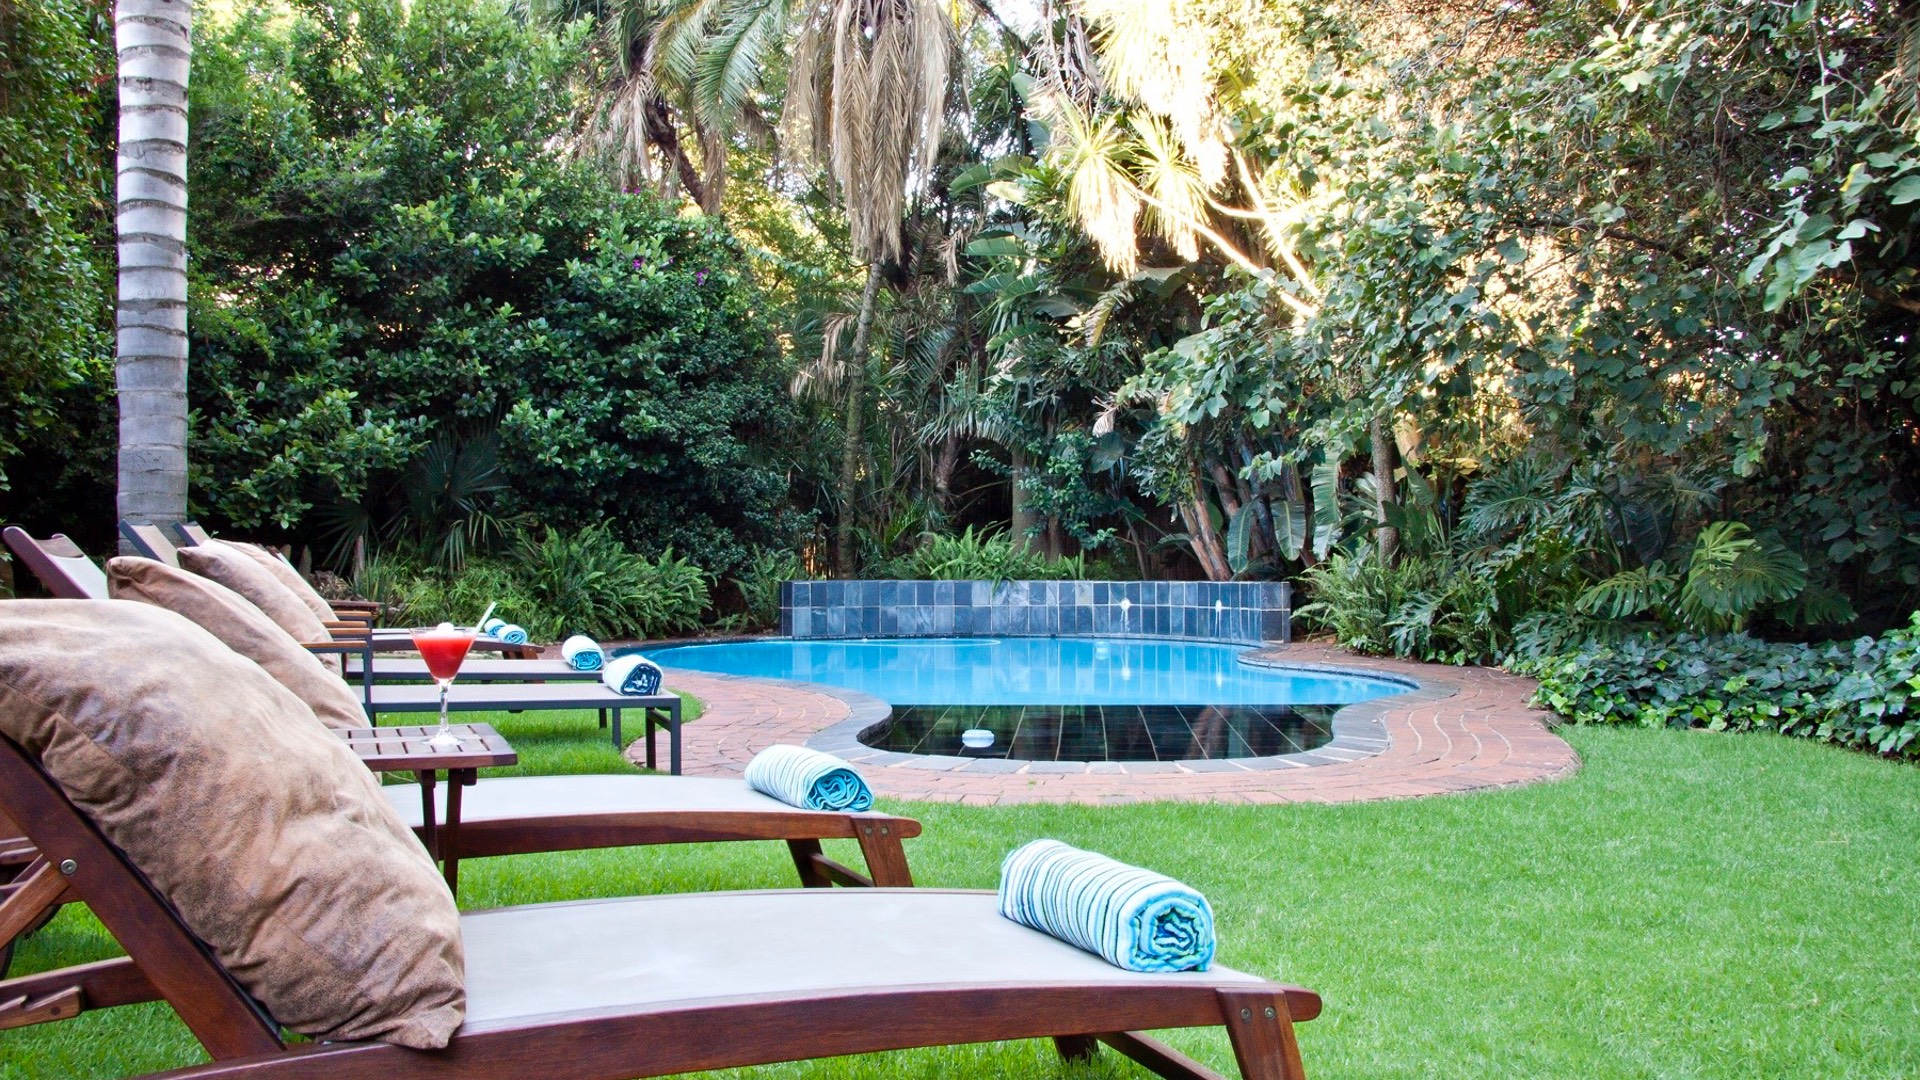 African Rock Hotel Pool Area